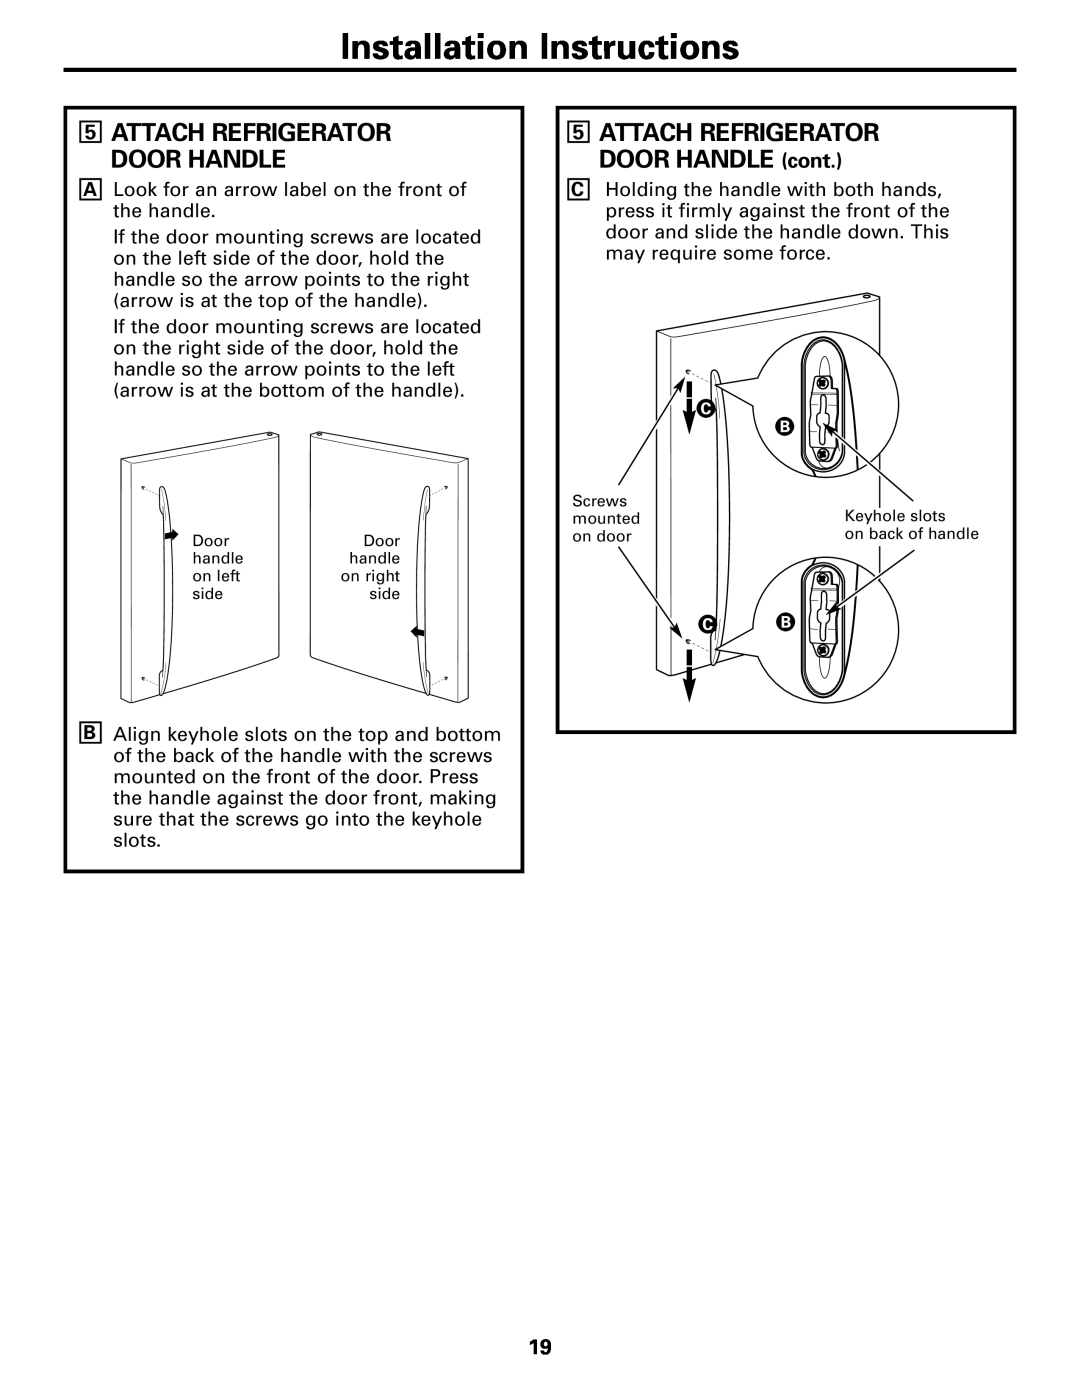 GE 197D4618P003 Installation Instructions, Attach Refrigerator Door Handle, ATTACH REFRIGERATOR DOOR HANDLE cont 